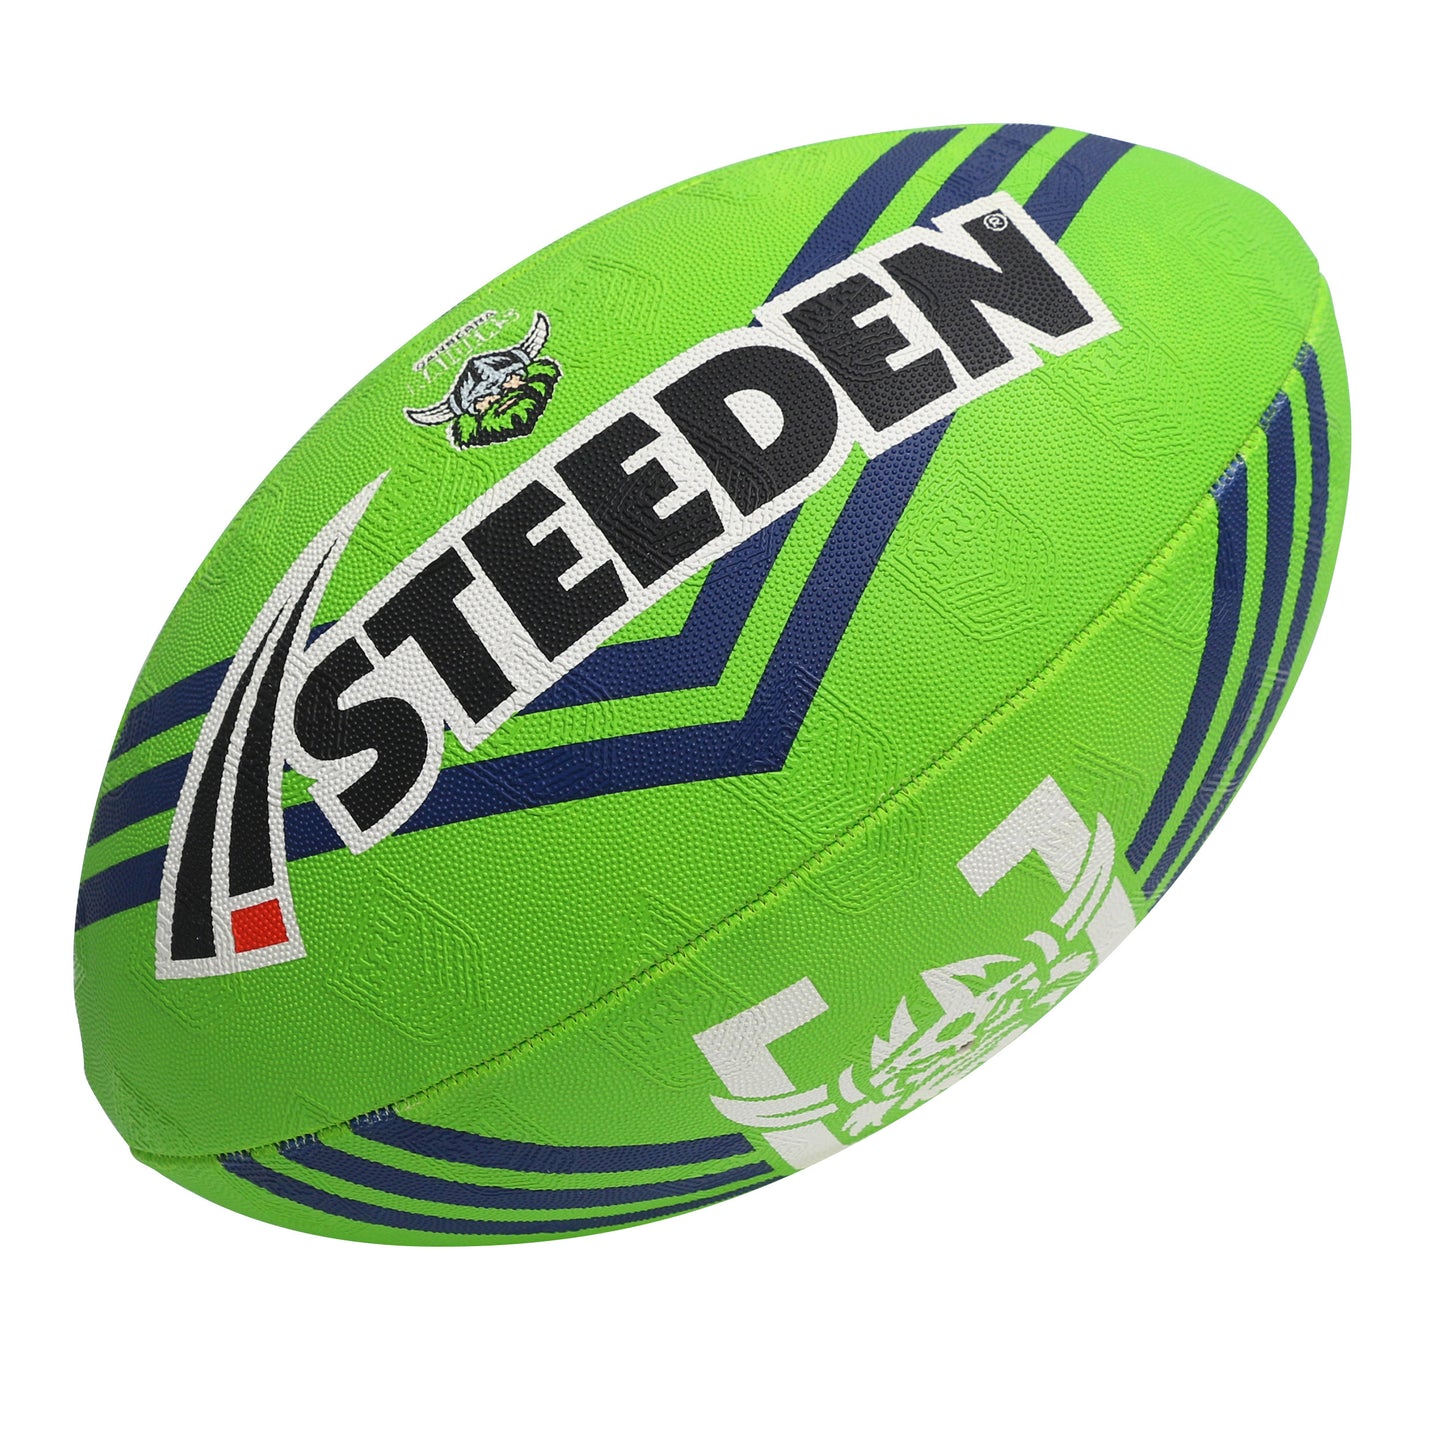 2023 NRL Raiders Supporter Ball (11 inch)